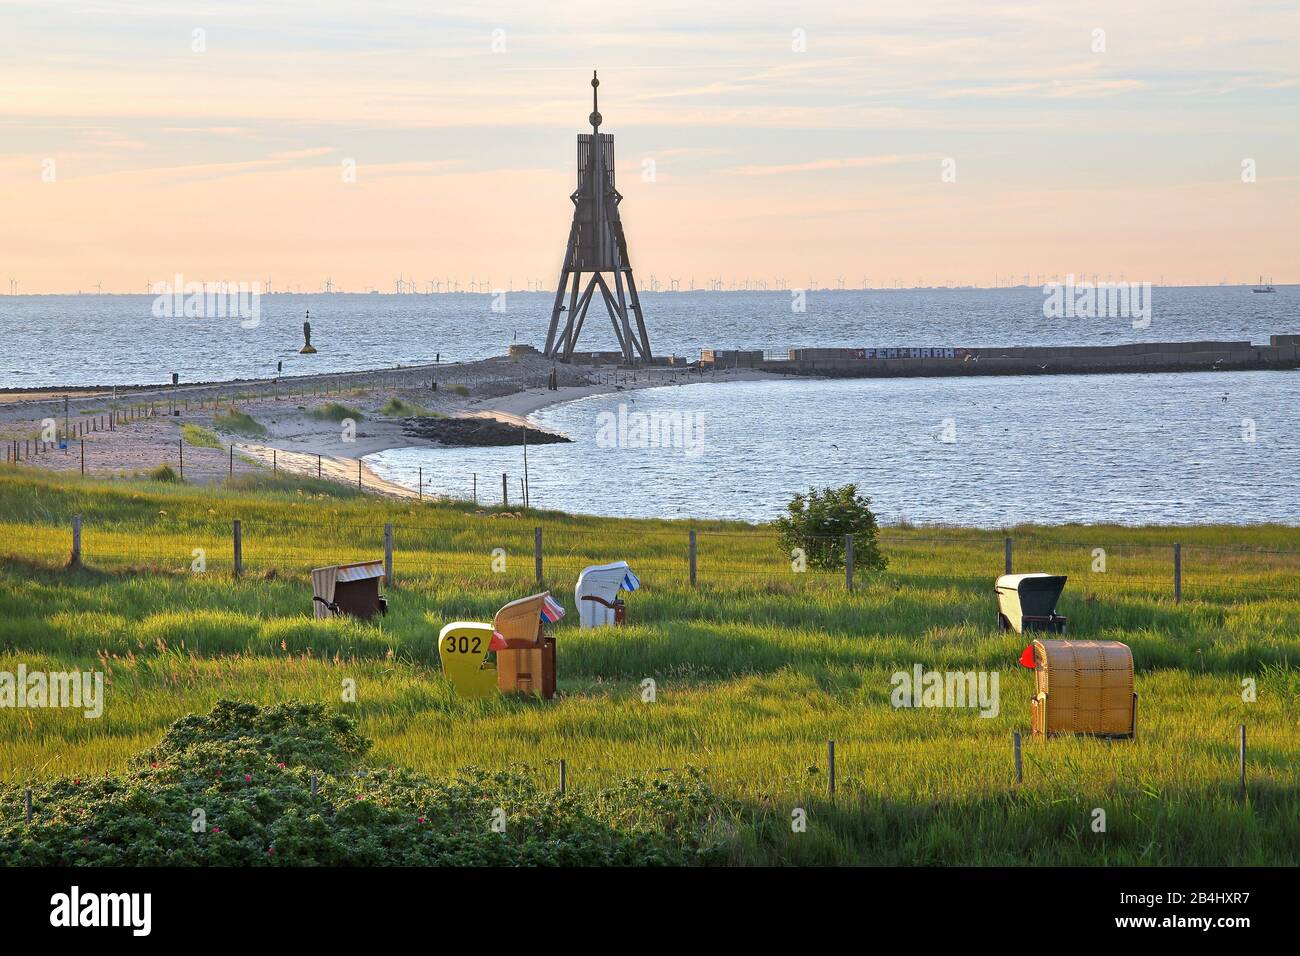 Grass beach with beach chairs and sea sign Kugelbake at the Elbe estuary in the district Döse at early morning sun, North Sea resort Cuxhaven, Elbe estuary, North Sea, North Sea coast, Lower Saxony, Germany Stock Photo